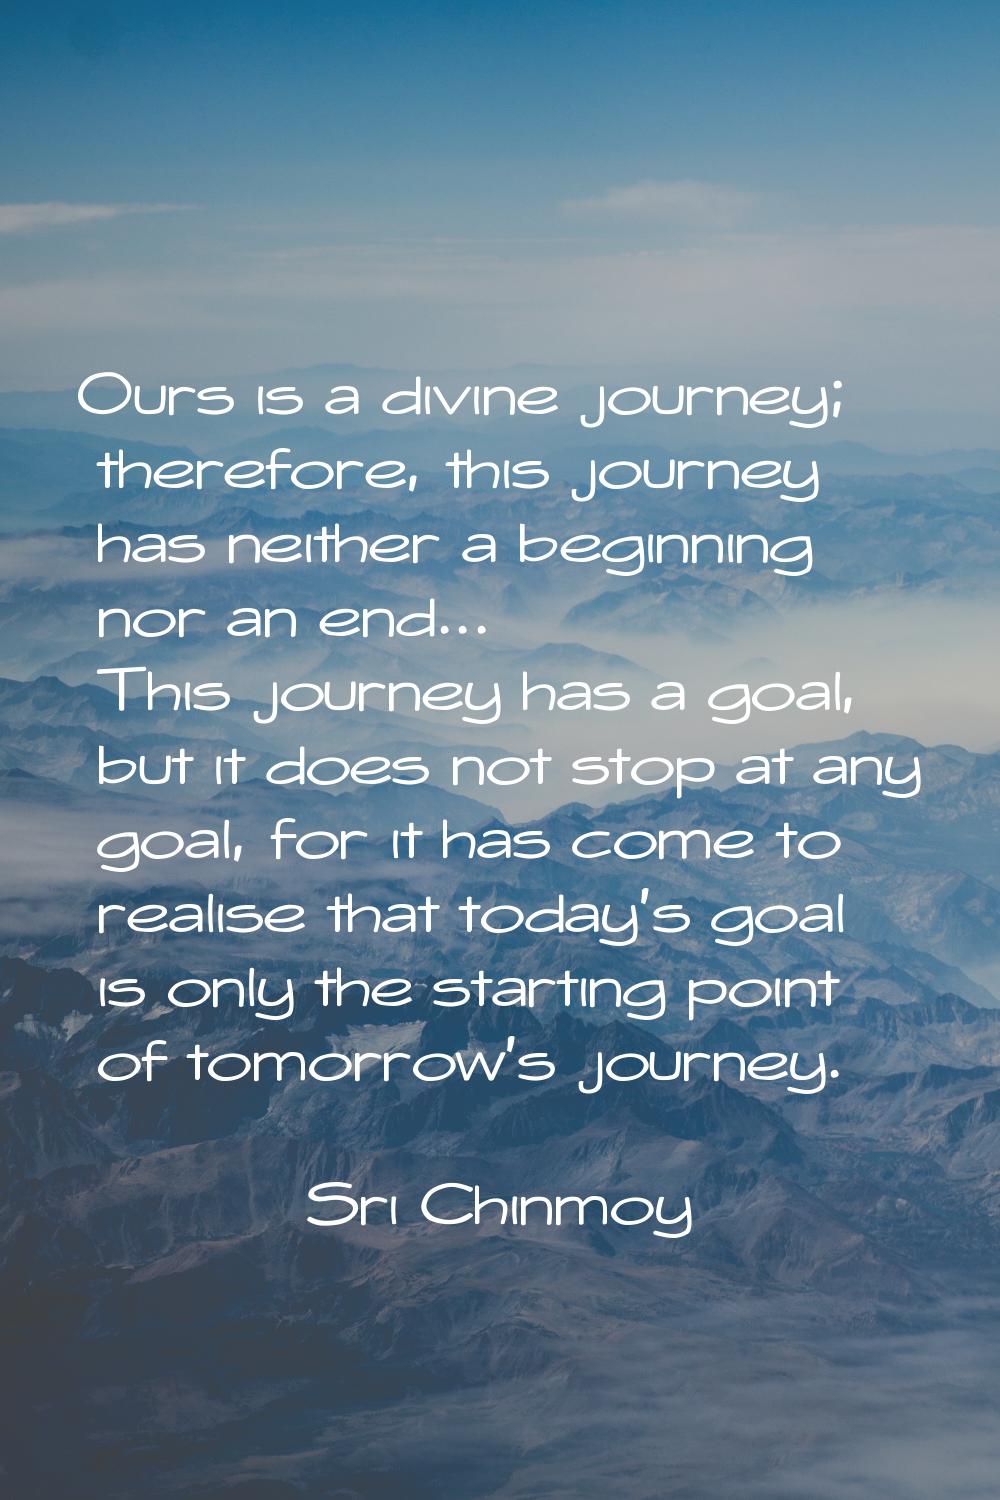 Ours is a divine journey; therefore, this journey has neither a beginning nor an end... This journe